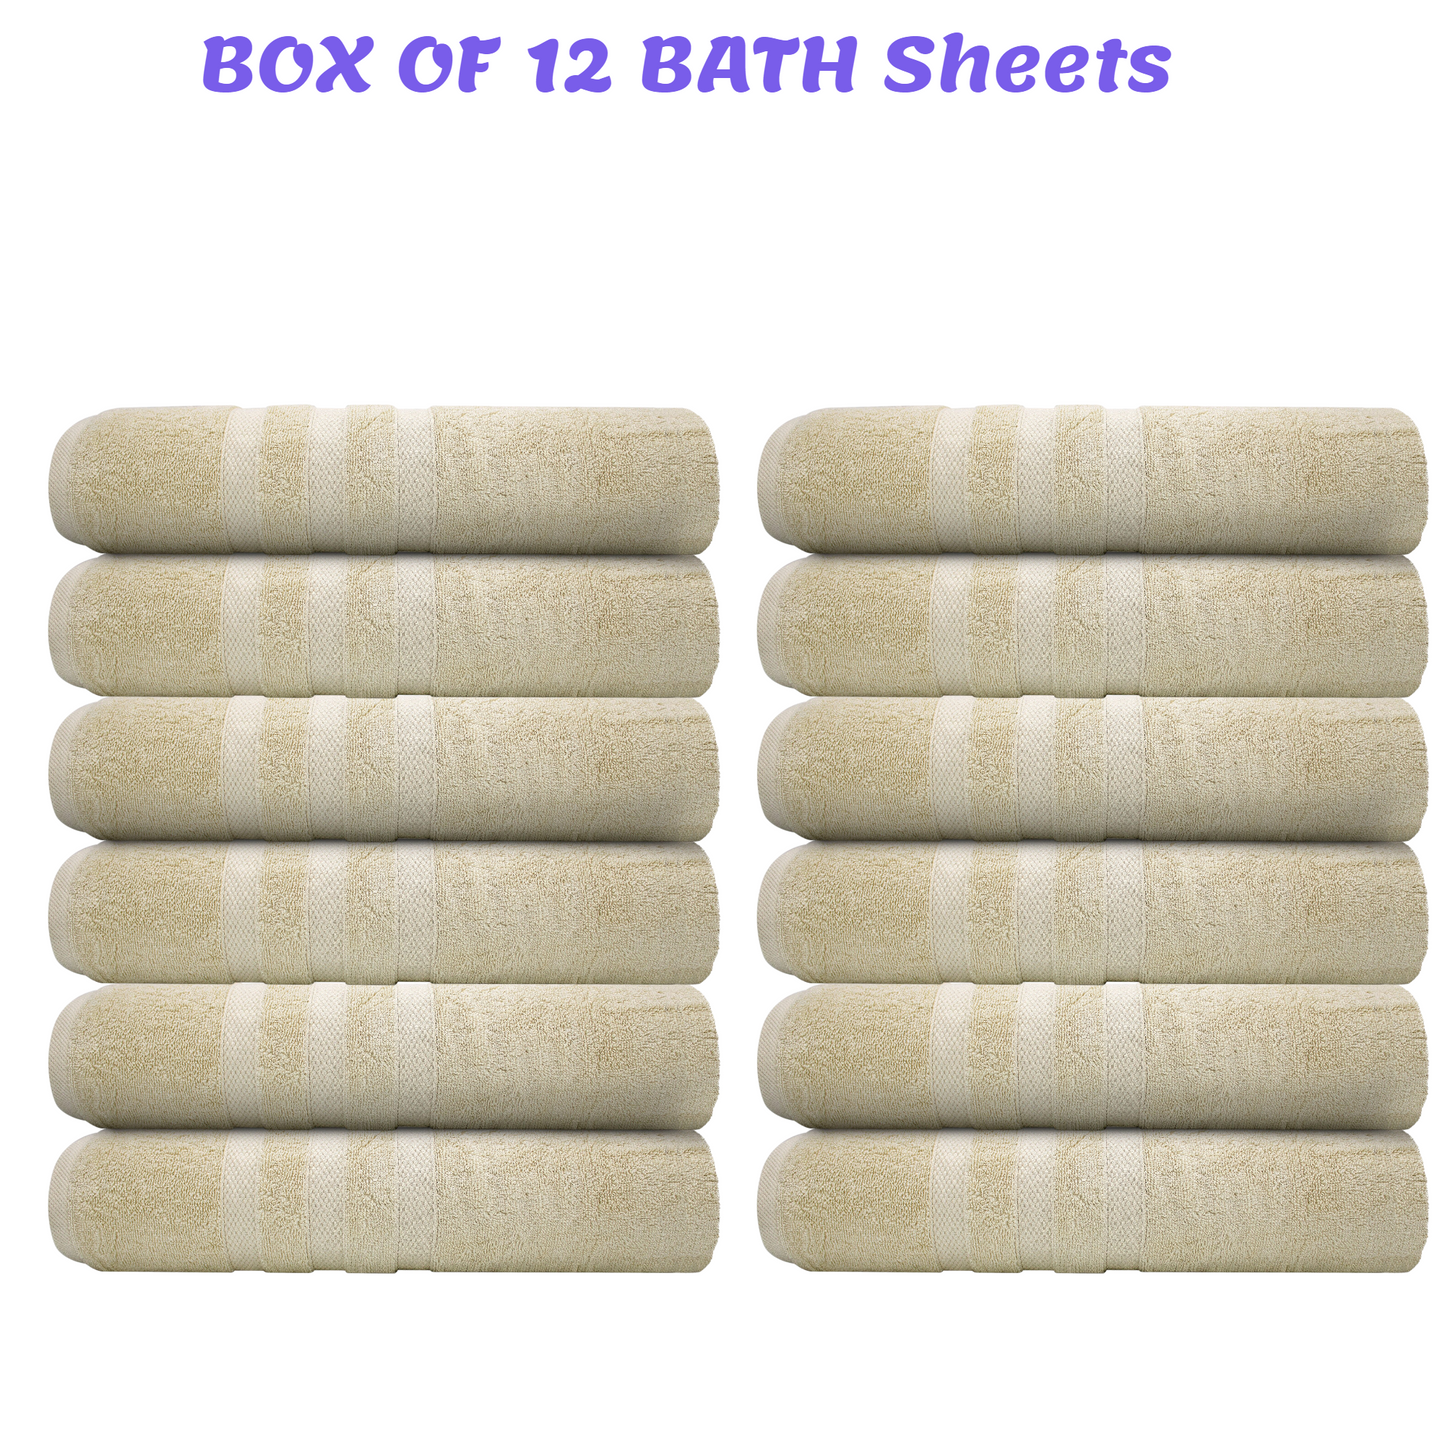 Wholesale Turkwell Bath Sheets Towels, 100% Combed Cotton, 35x70 in, Extra Large, Beige, BOX of 12